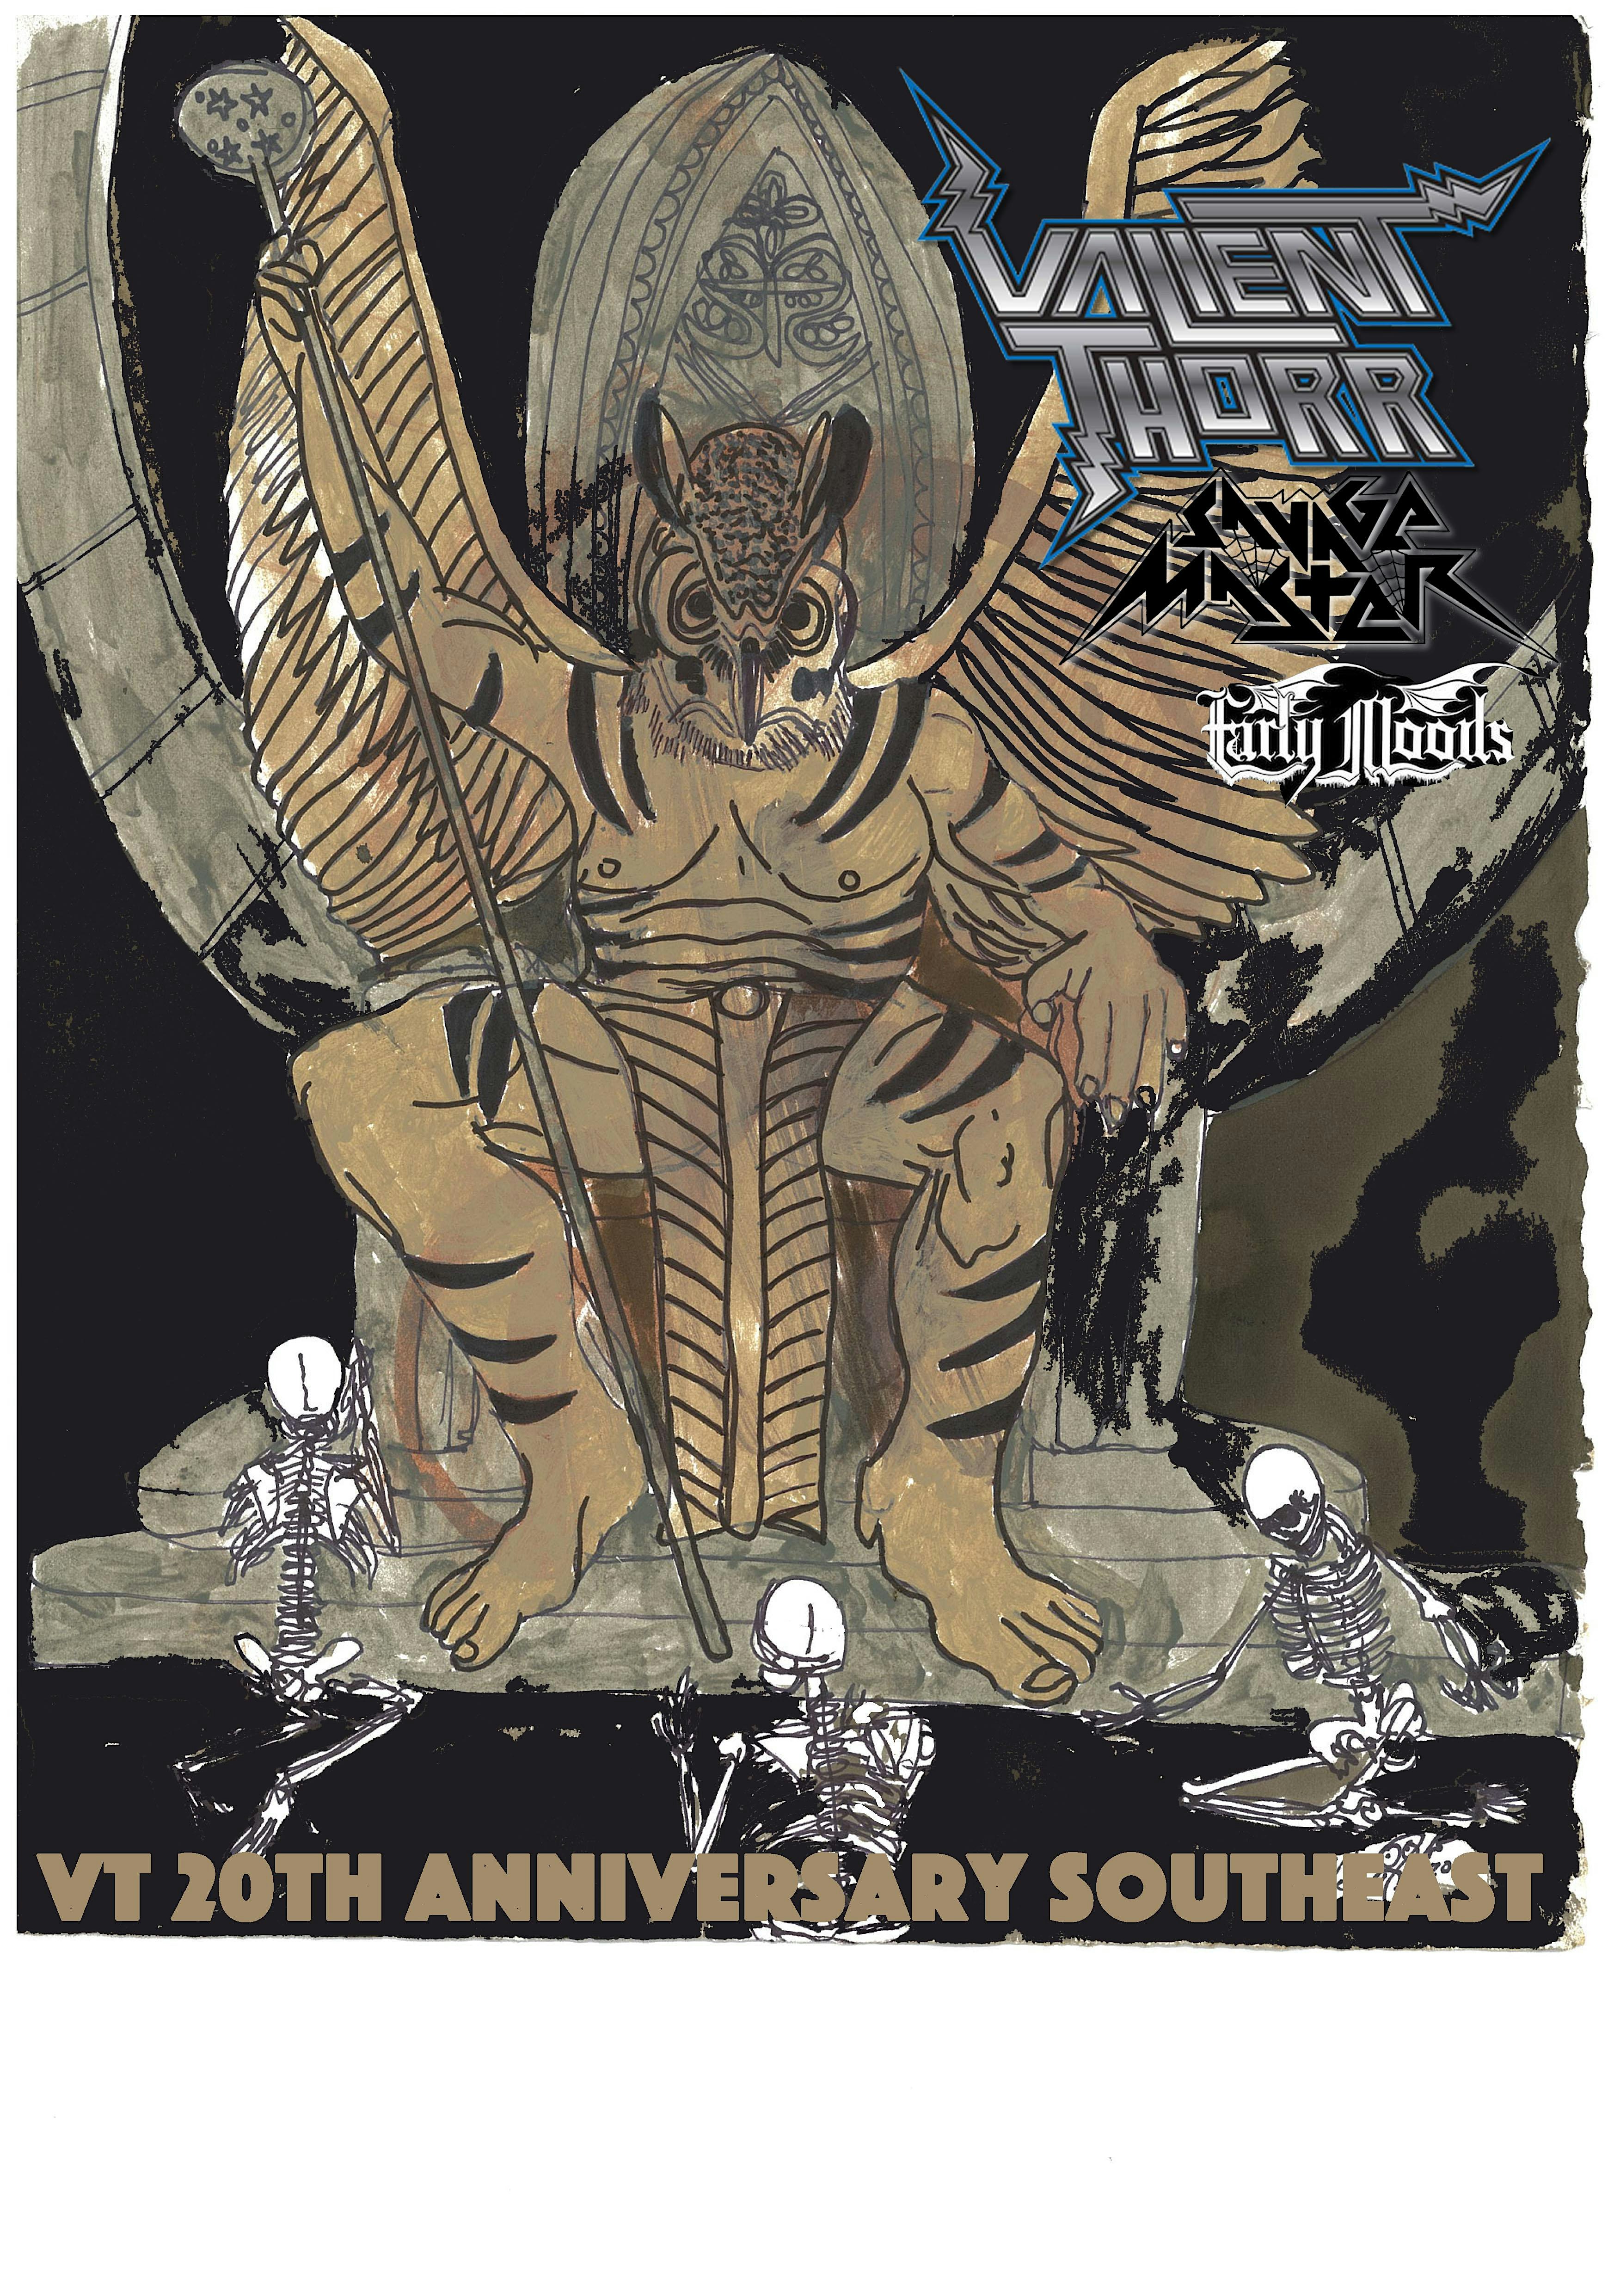 Valient Thorr 20th Anniversary Tour with Savage Master, Early Moods, and More at the Orpheum